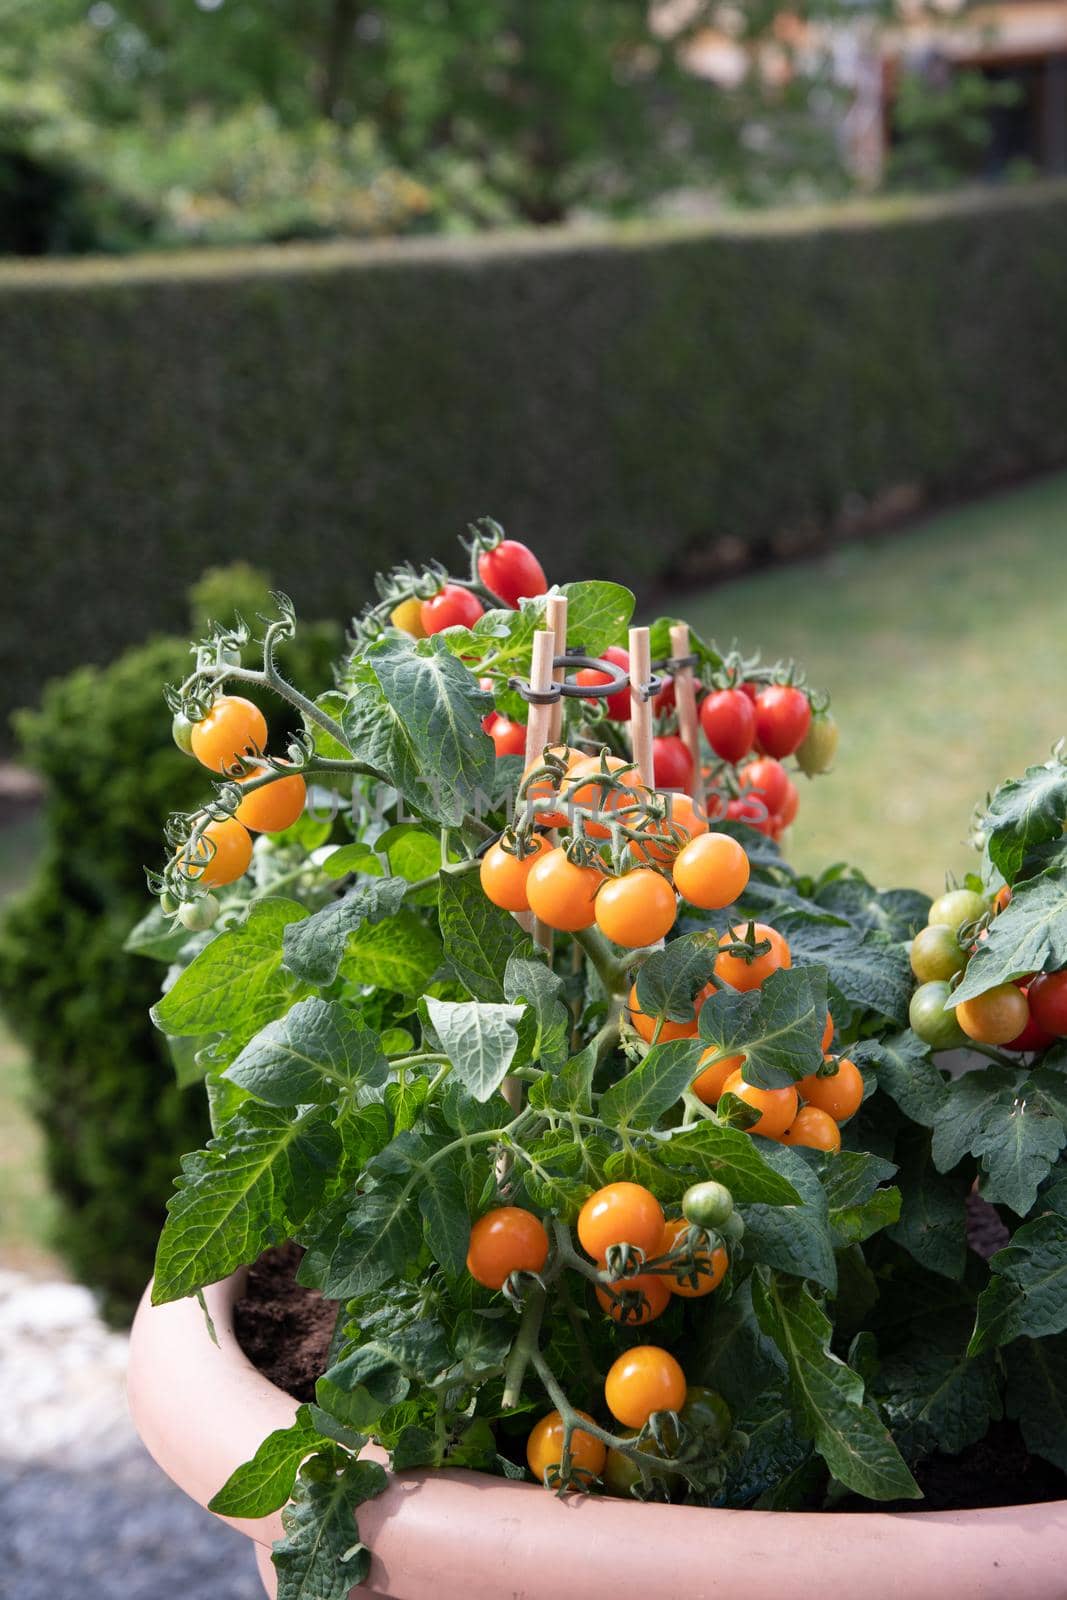 Large pots with cherry tomatoes on the garden terrace, planting a mini garden when there is no space. High quality photo